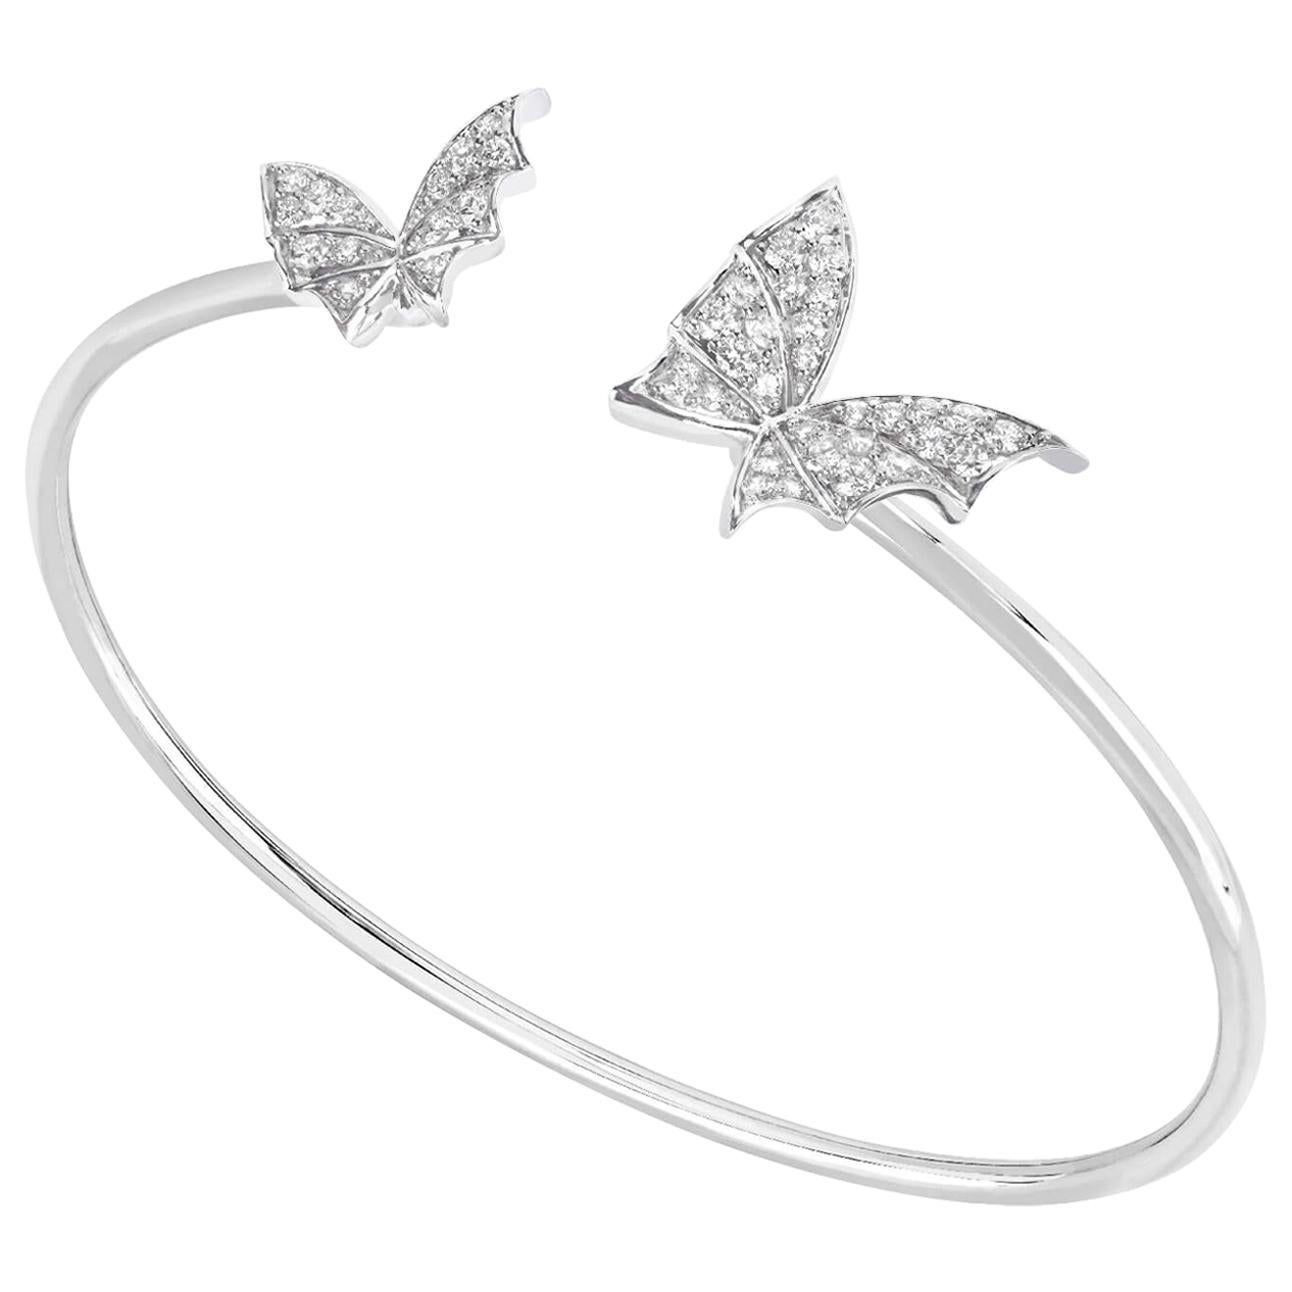 Stephen Webster Fly by Night 18 Carat White Gold and White Diamond Pavé Bangle